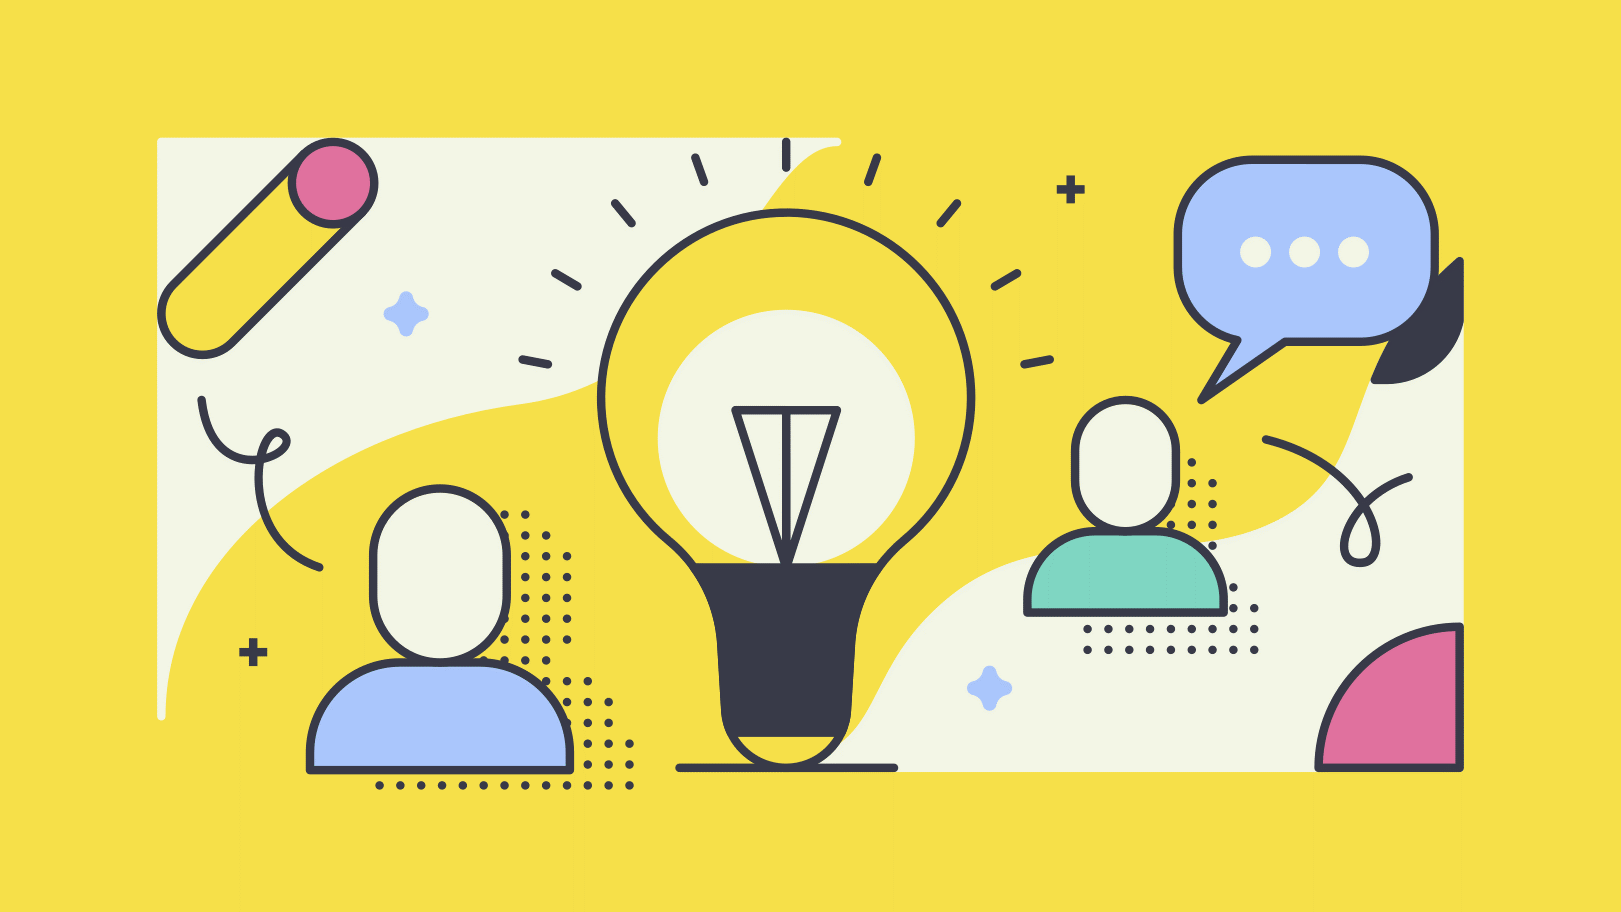 Creative brainstorming graphic with light bulb and icons.